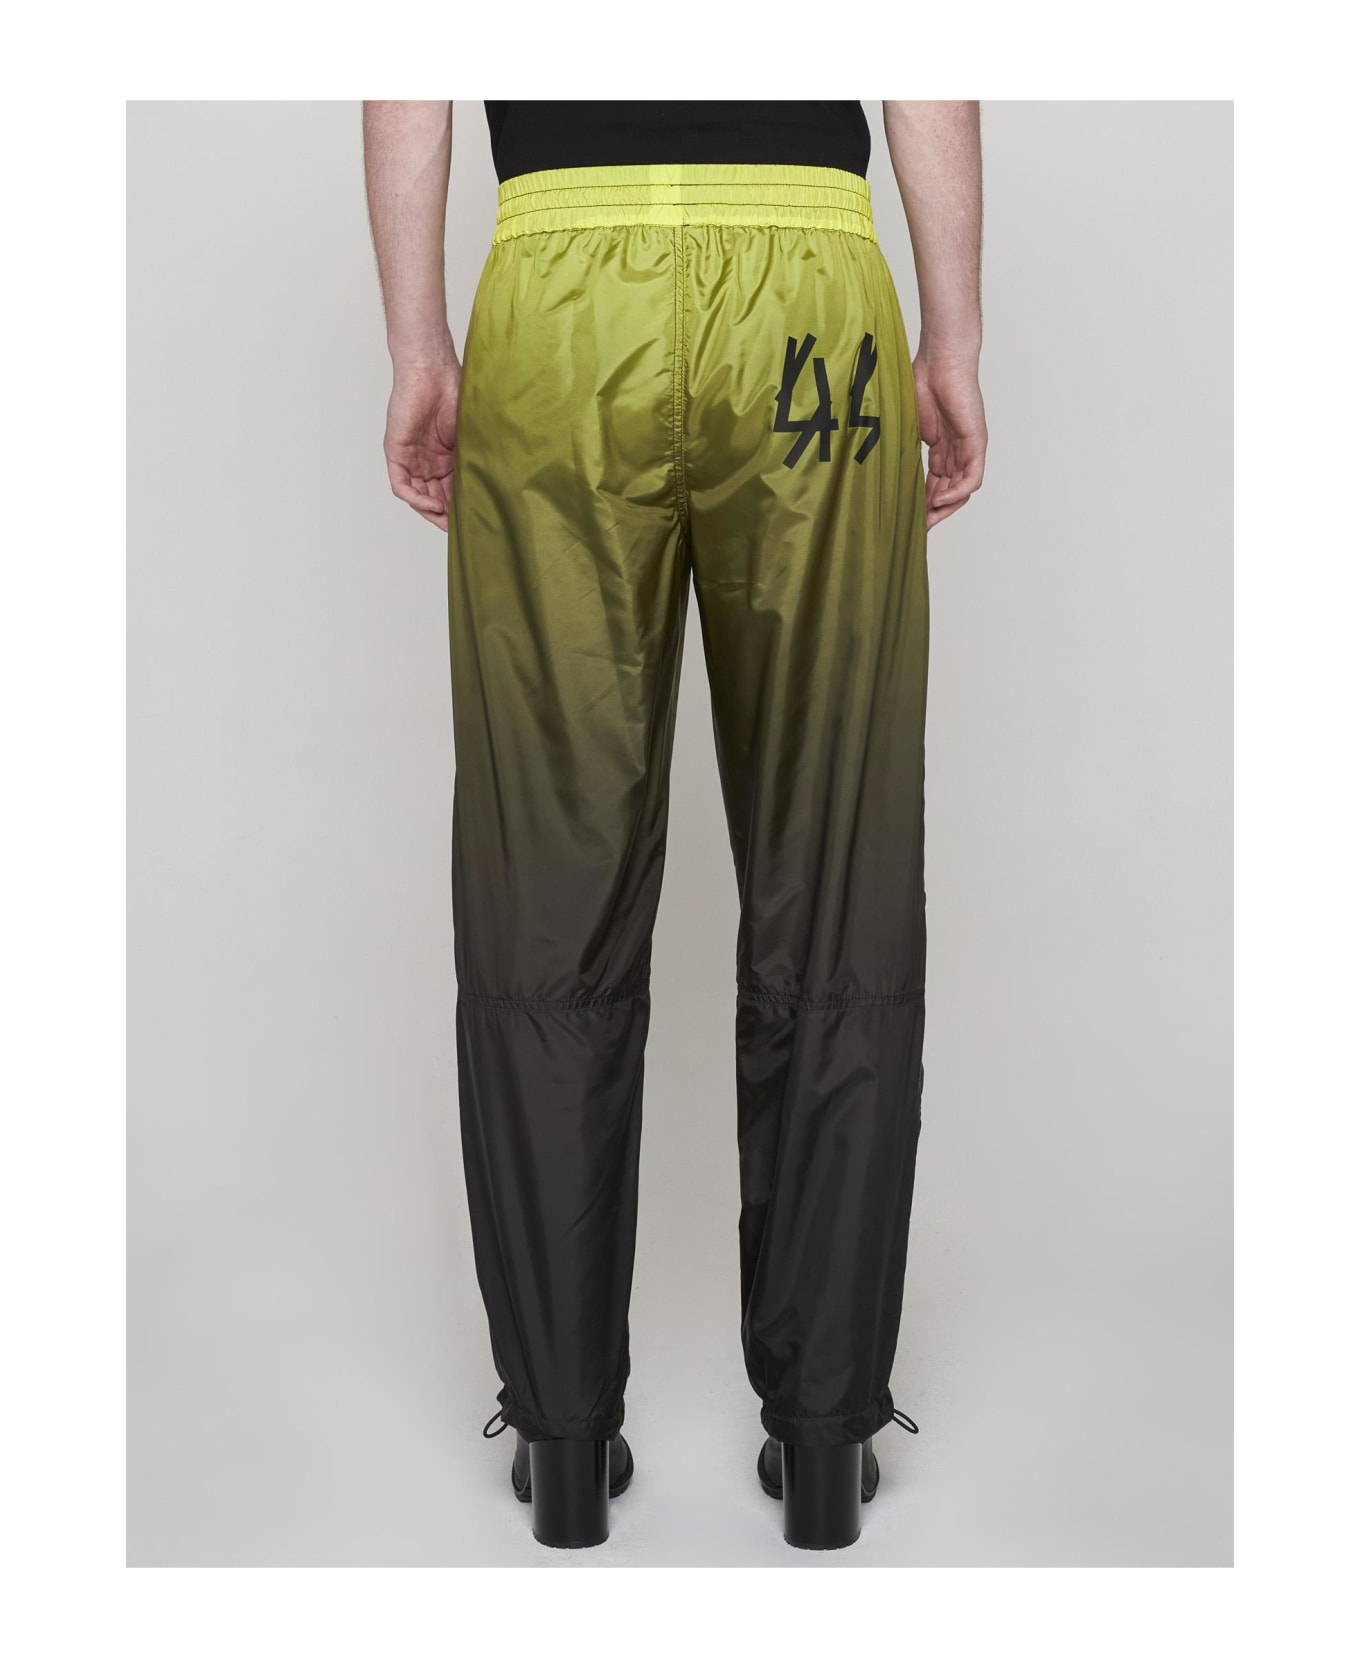 44 Label Group Grief Nylon Trousers